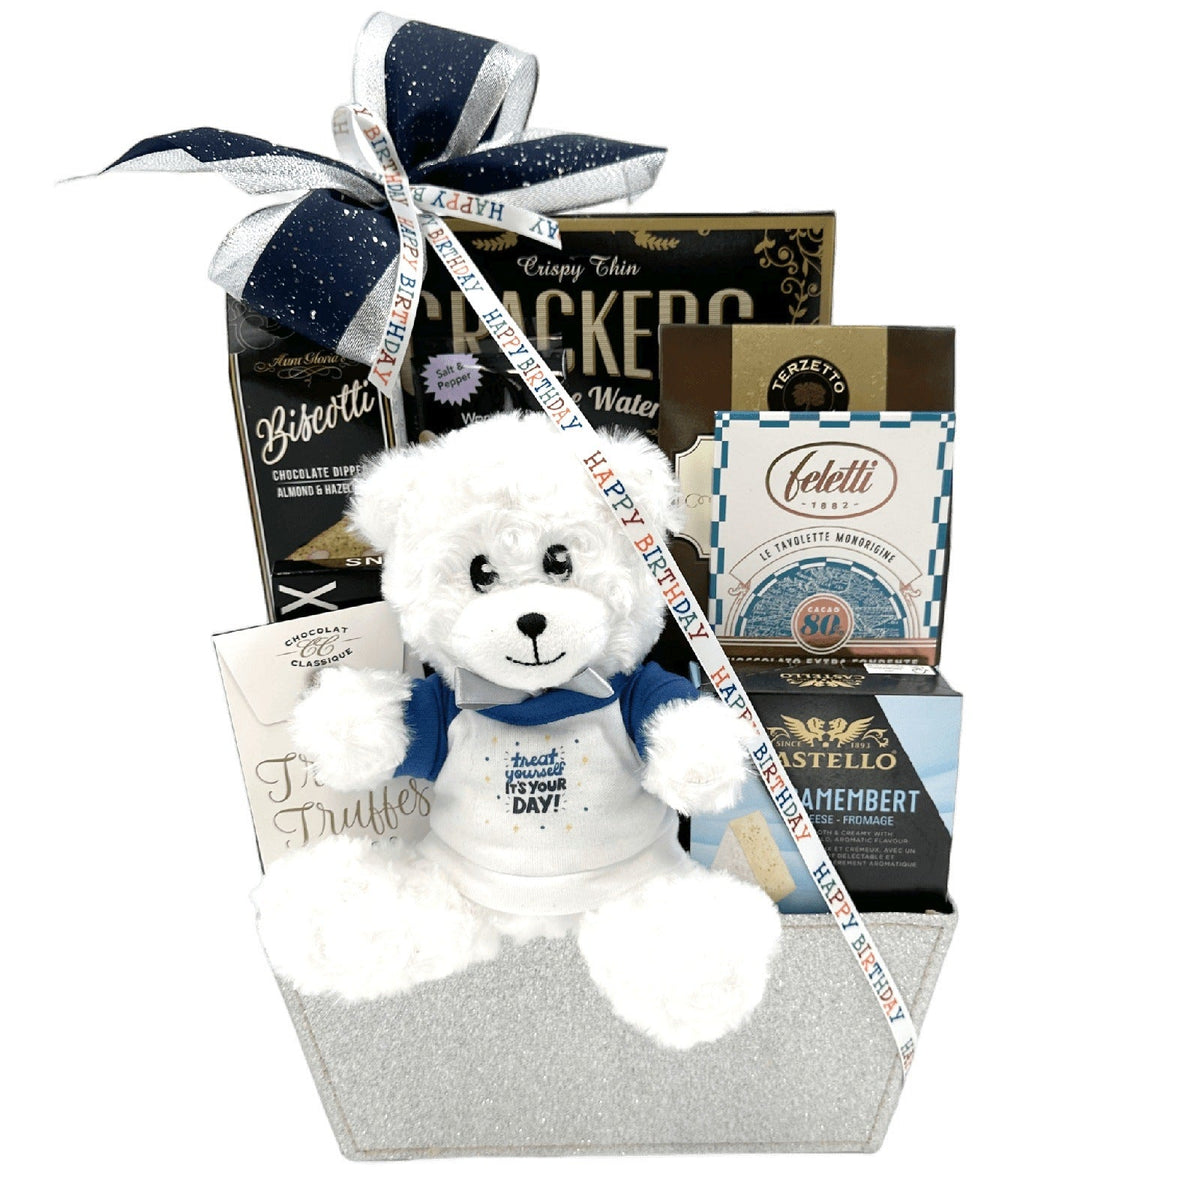 Treat Yourself, It's Your Day - Glitter Gift Baskets